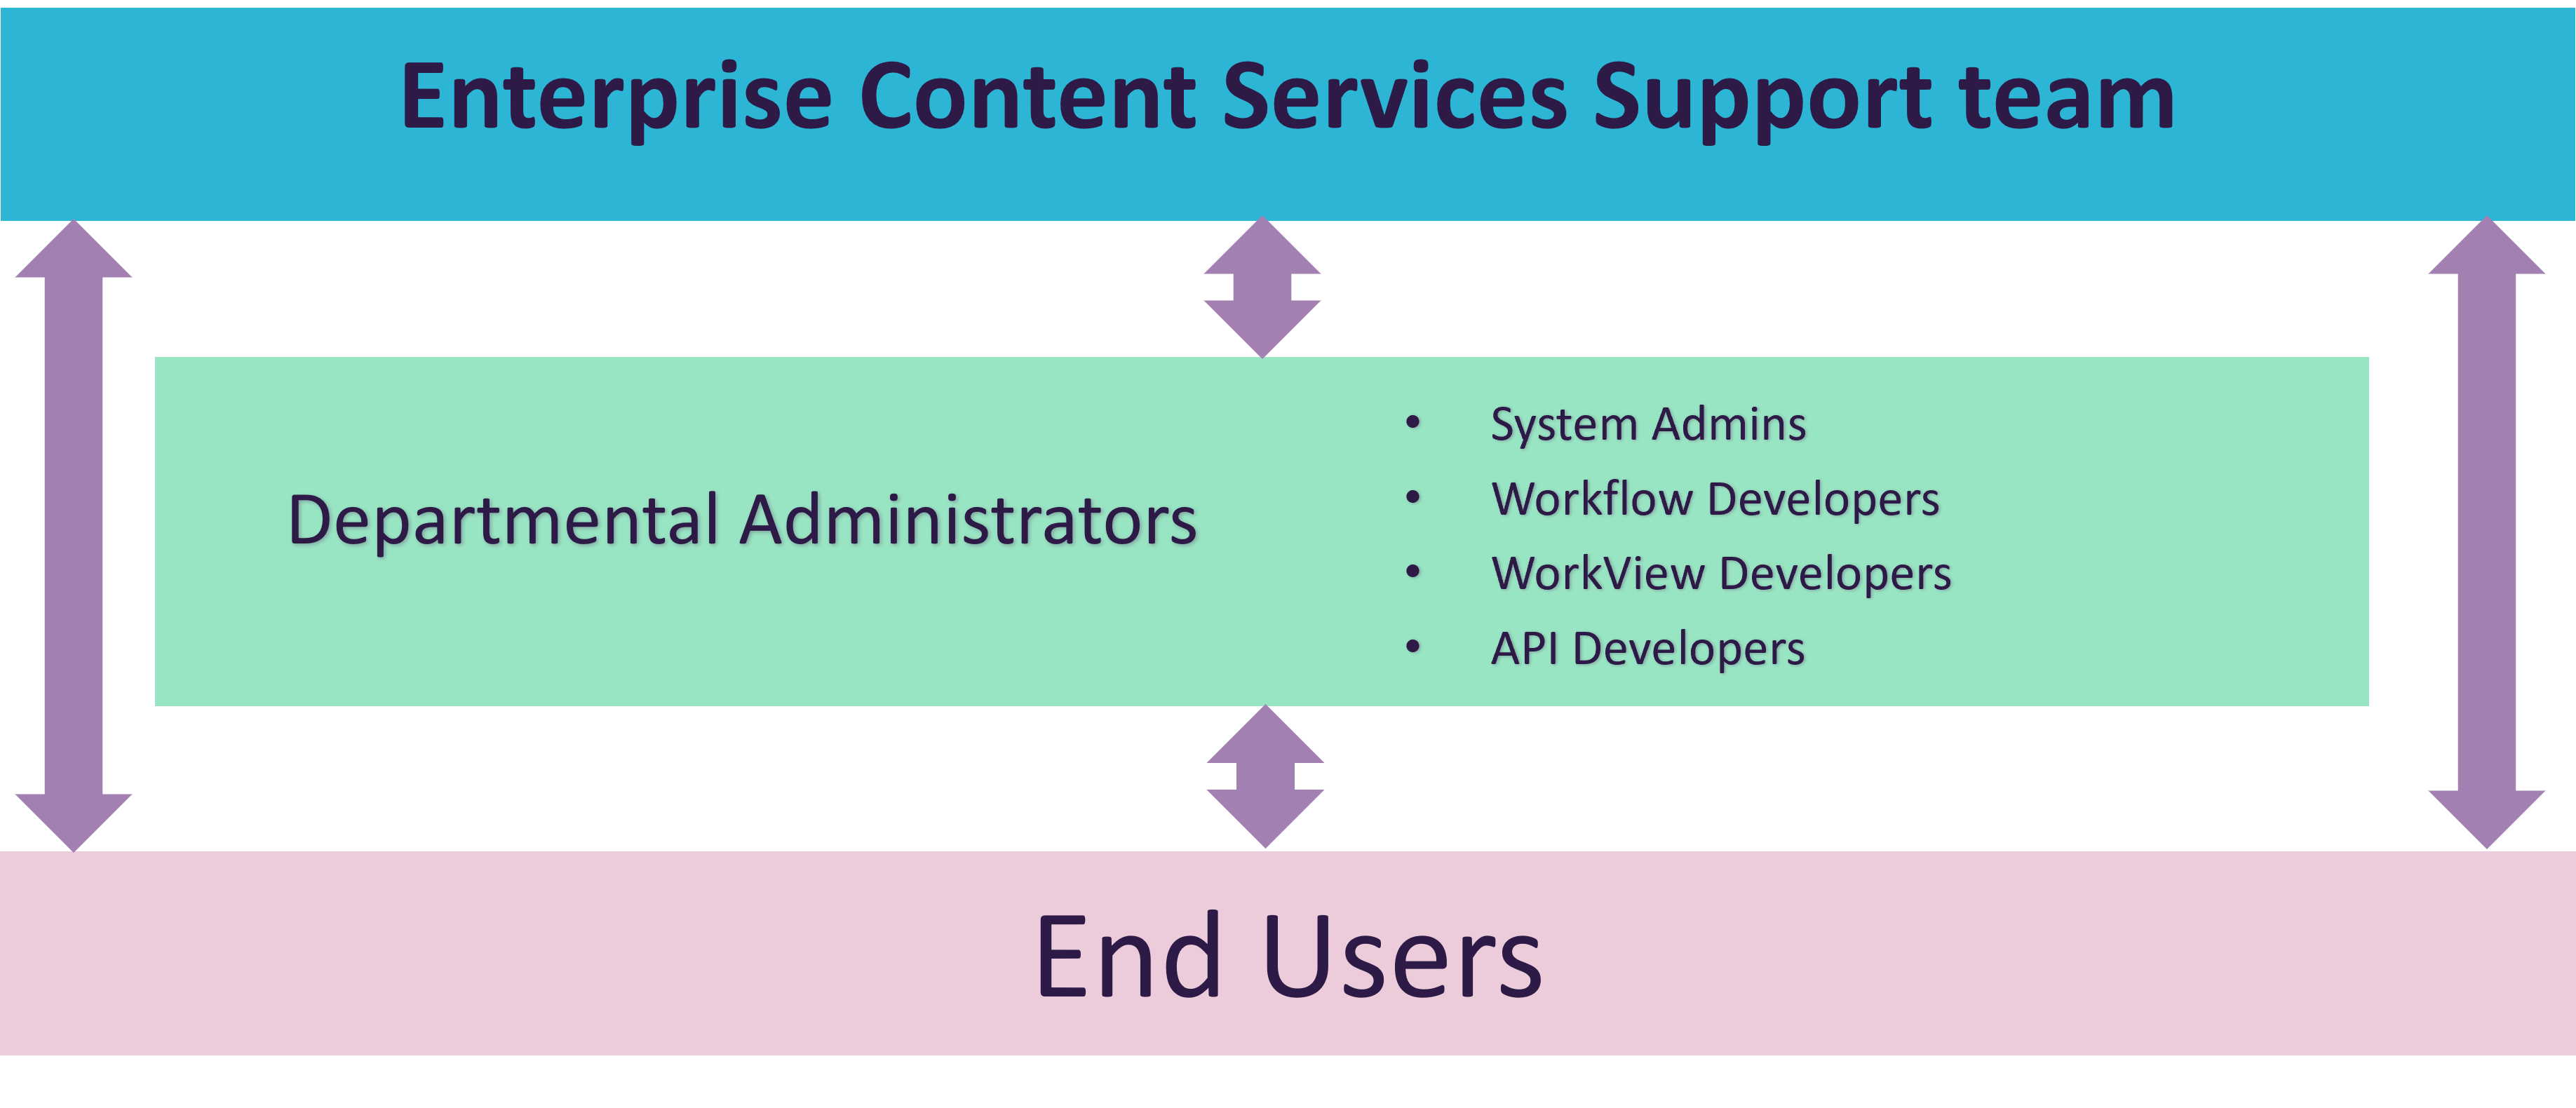 The Enterprise Content Services team supports distributed department admins (system admin, workflow developers, etc) who support end users. The UIS team also directly supports some end users.